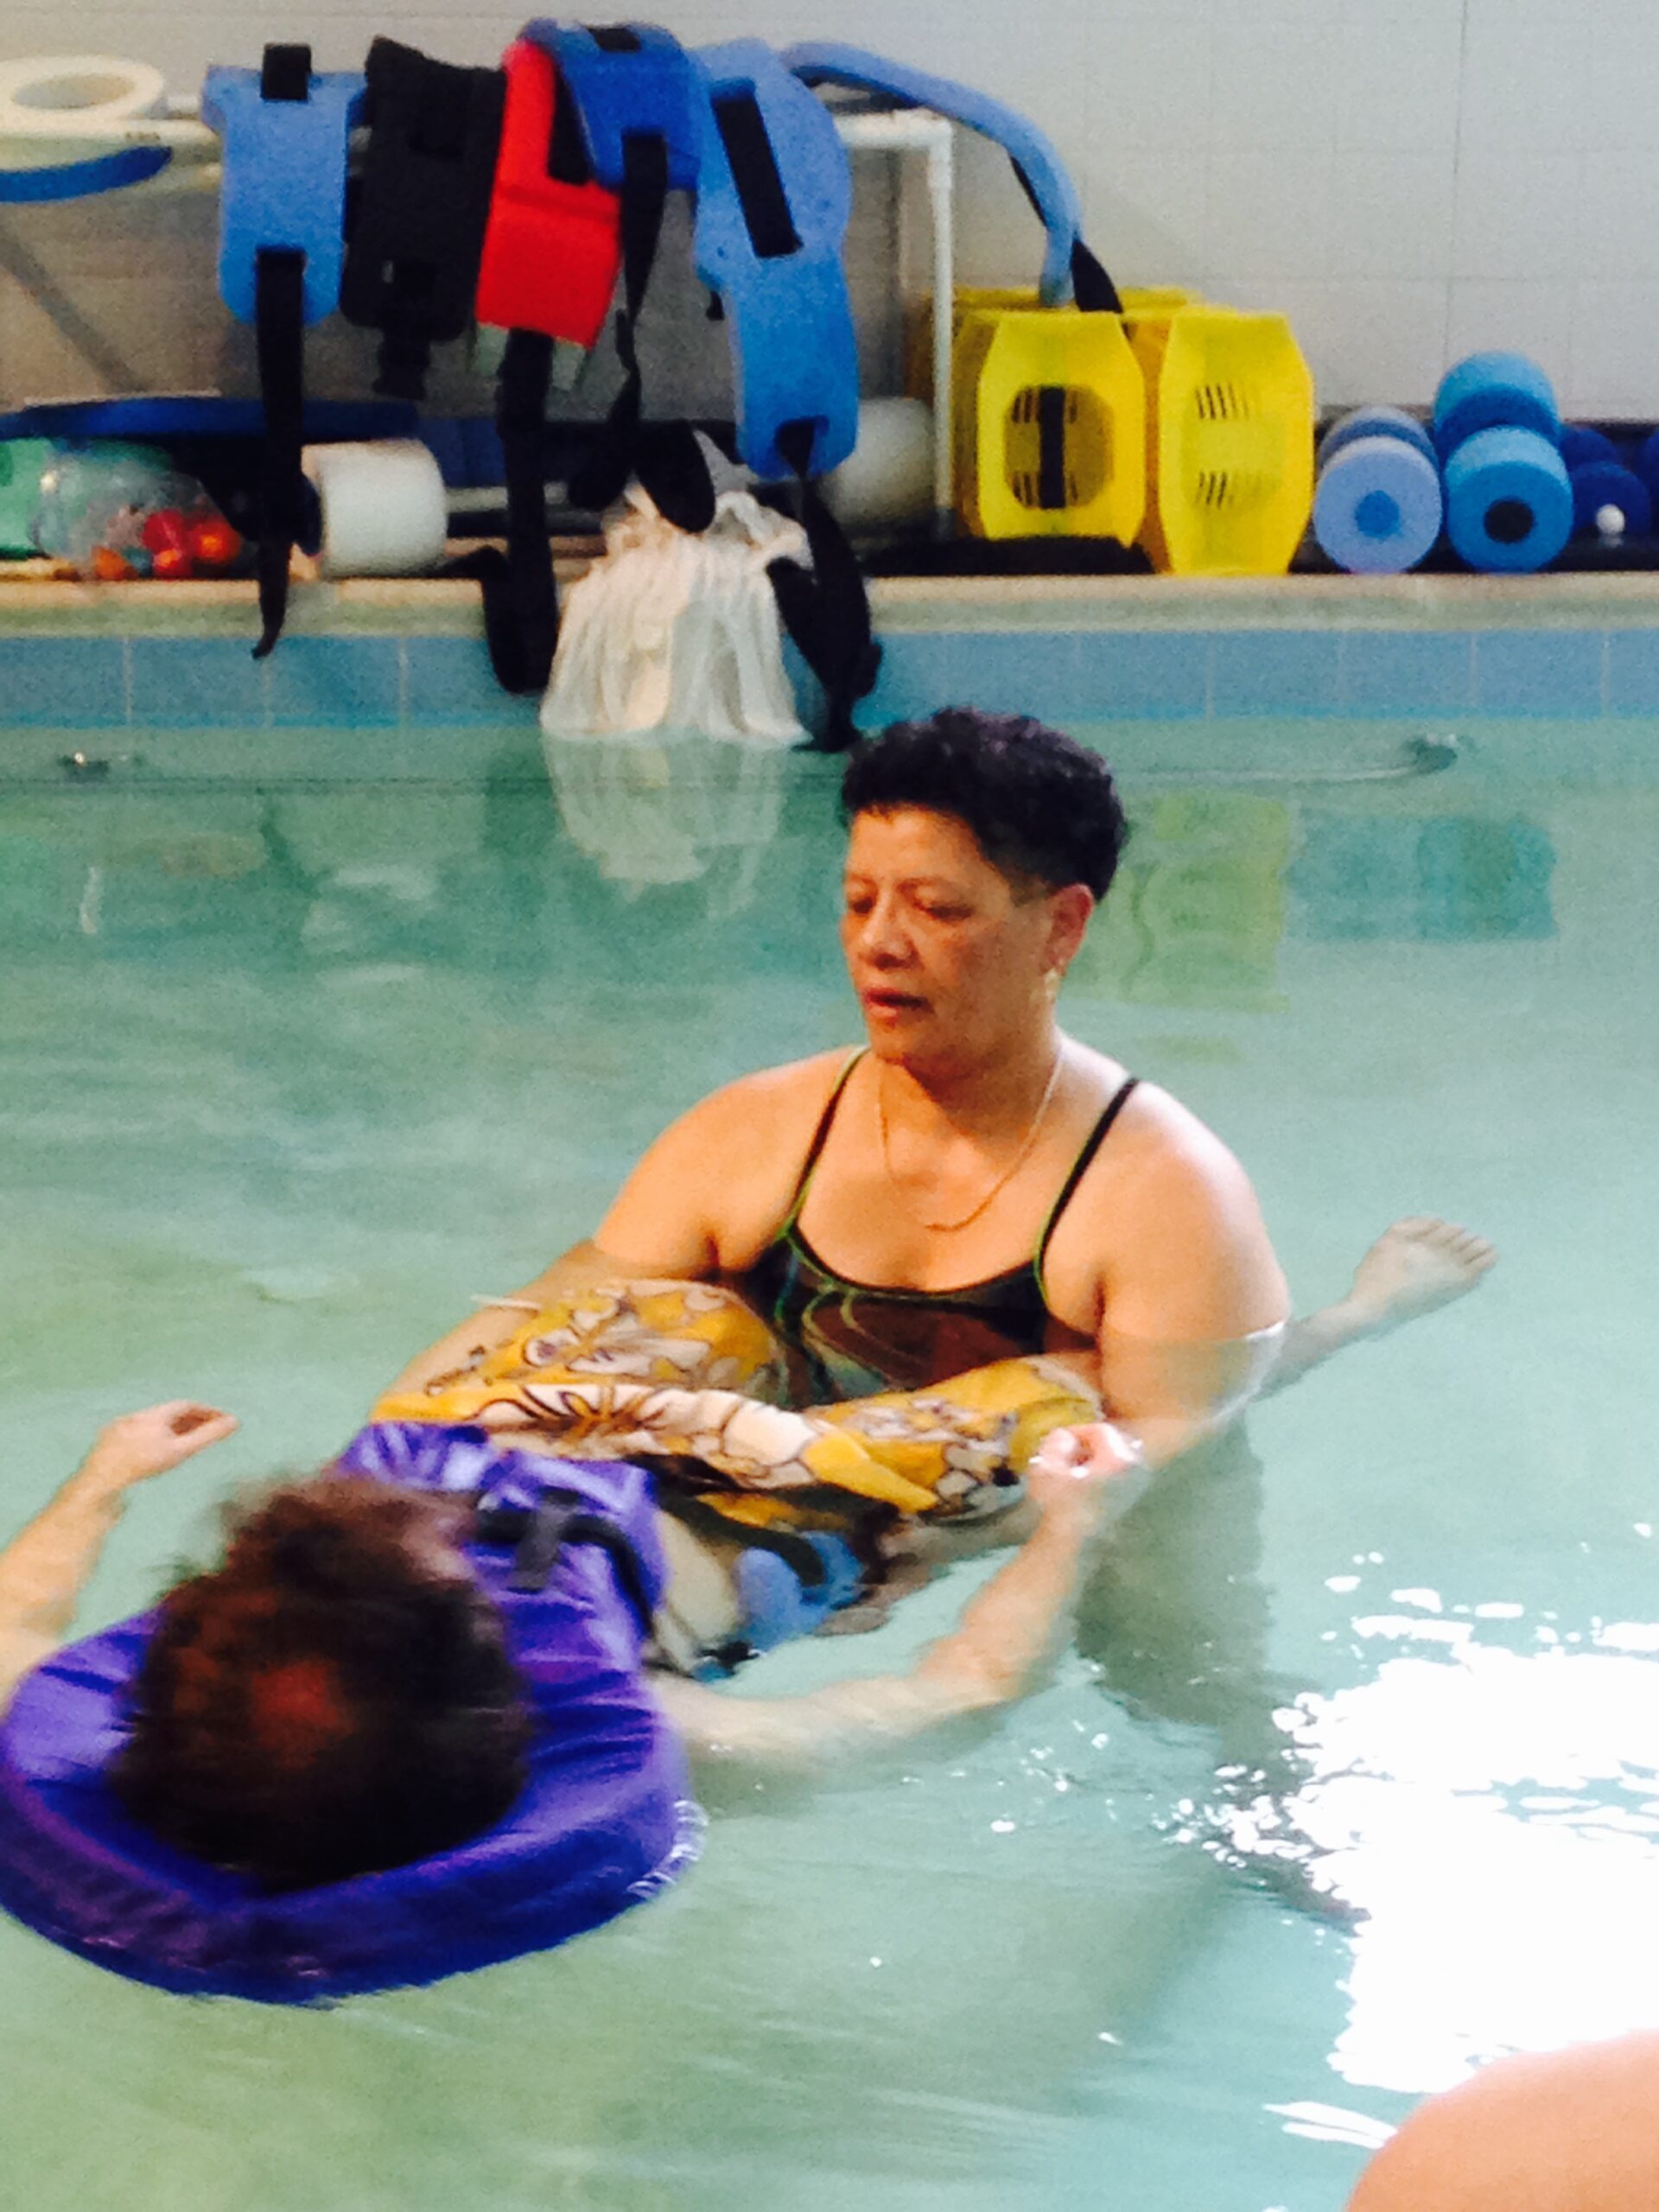 Juanita in the pool with a patient